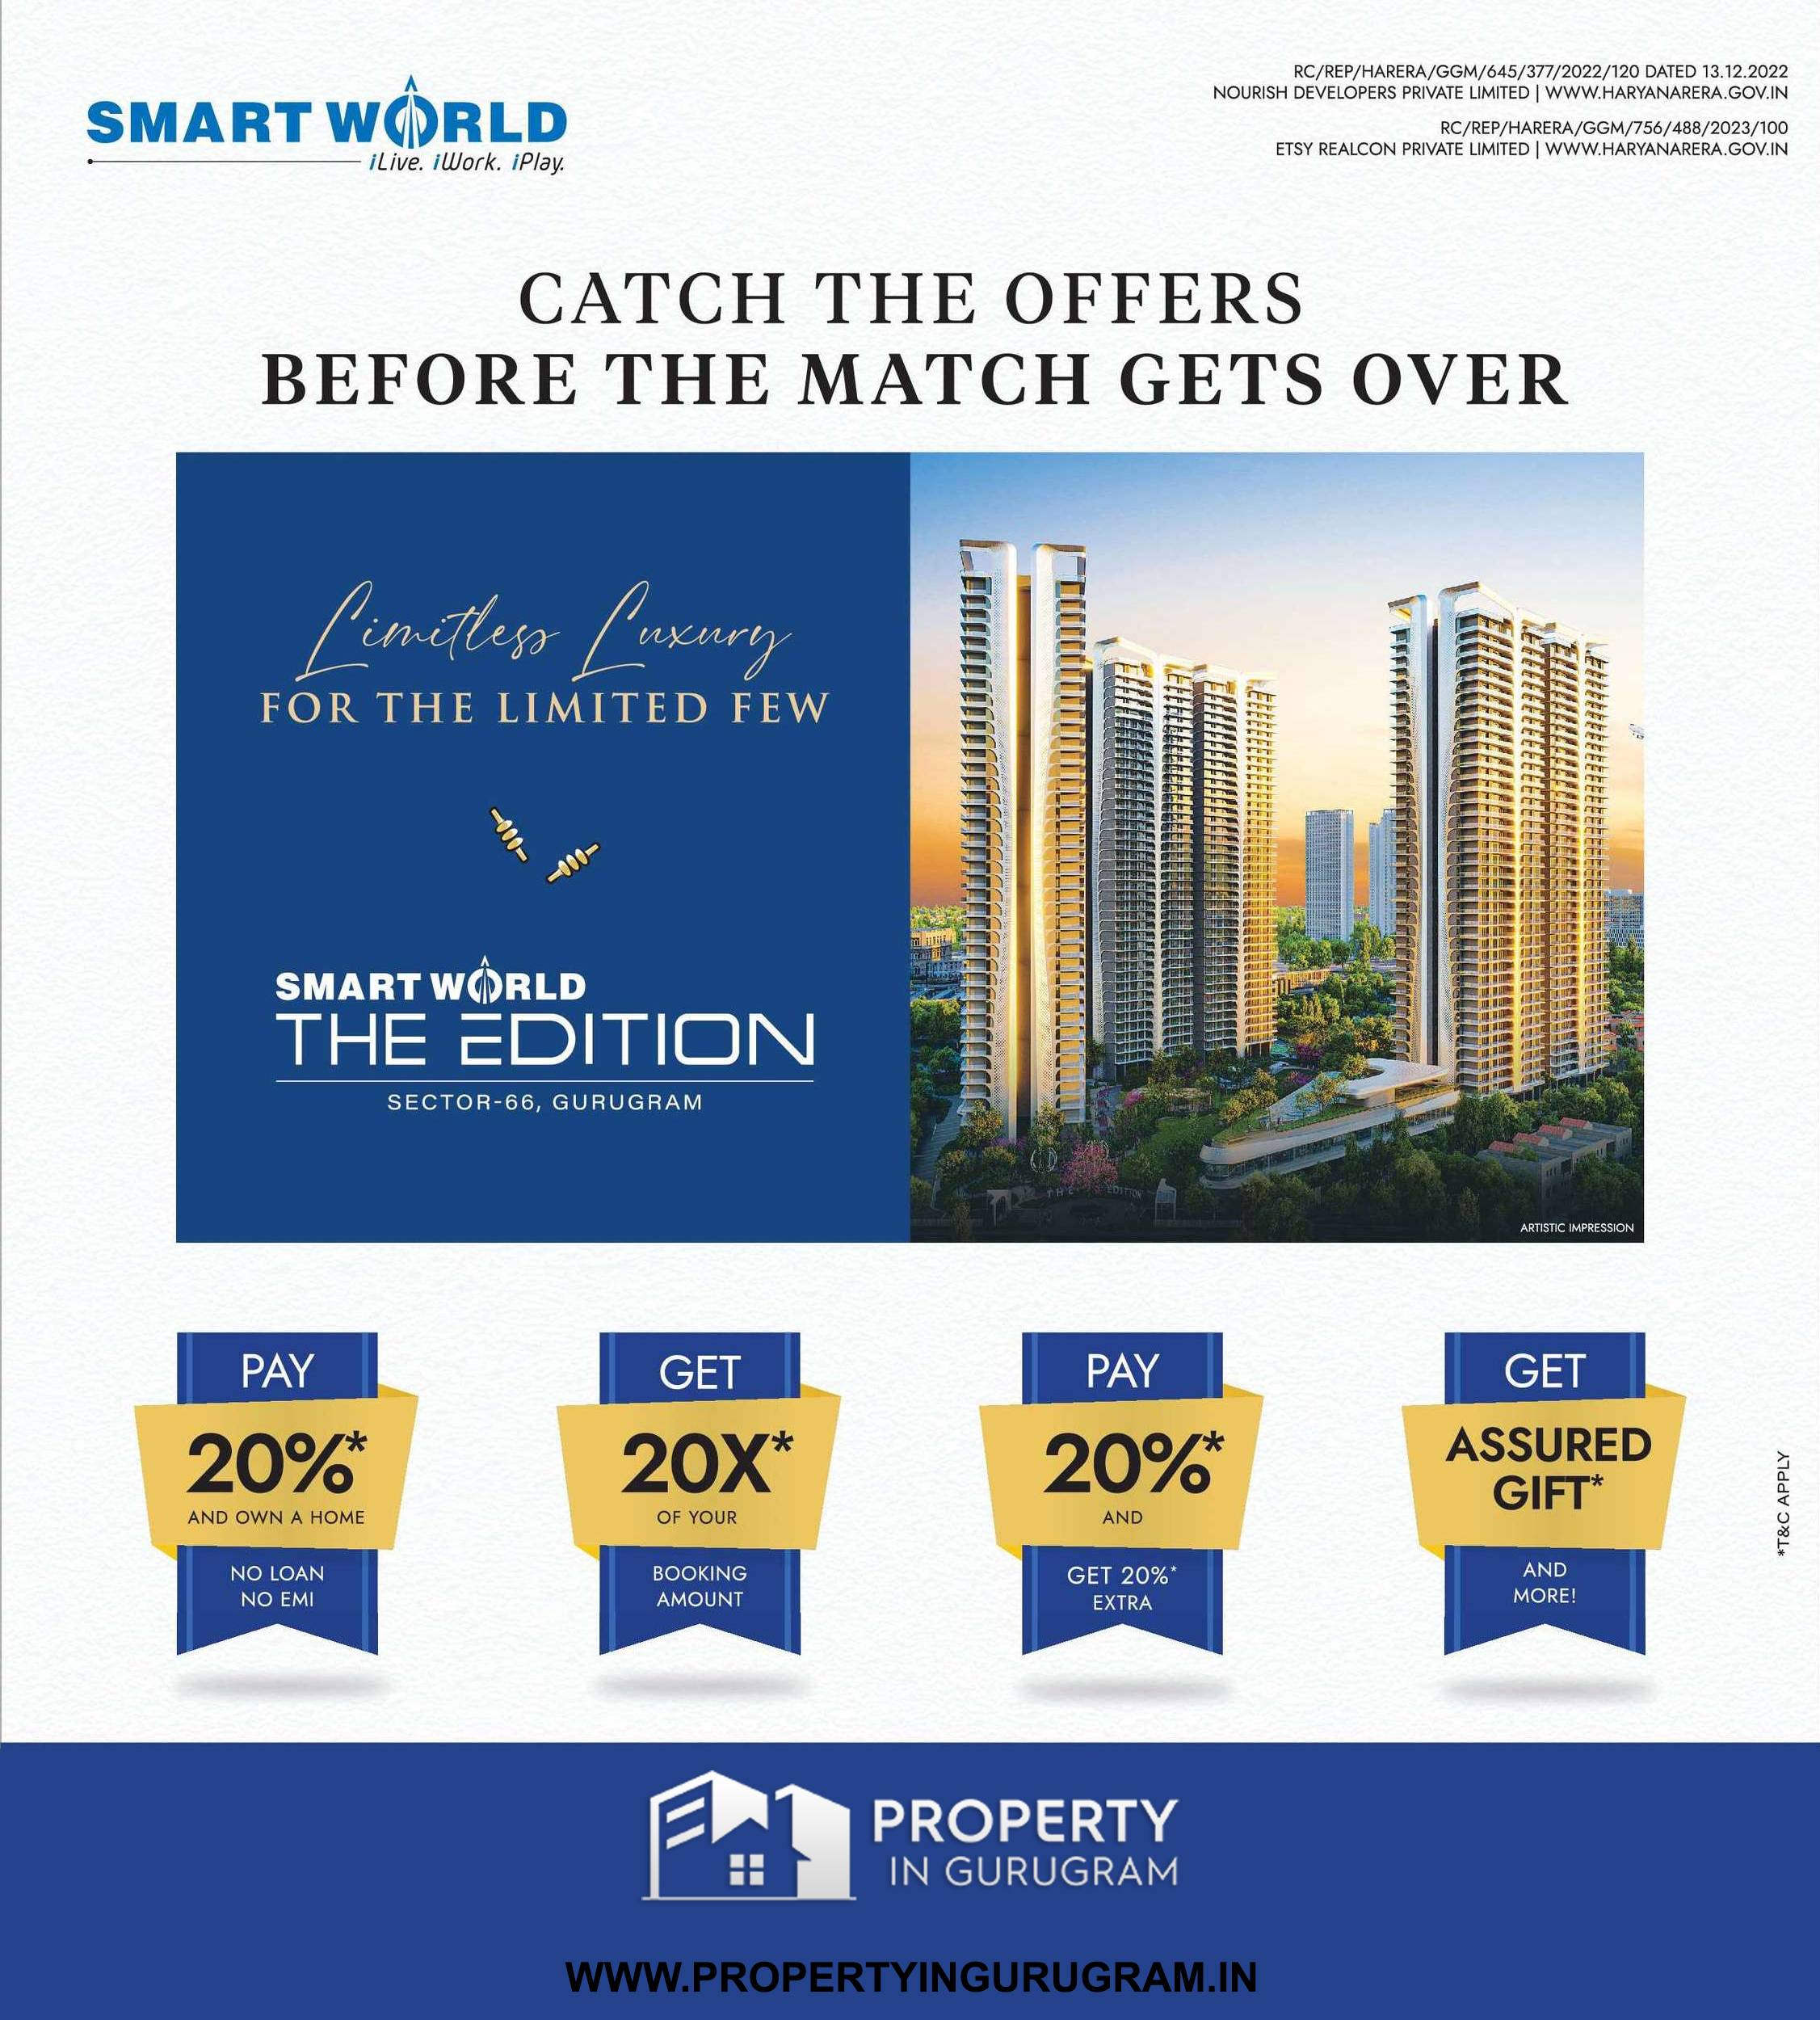 Smart World The Edition T20 Offers gurgaon